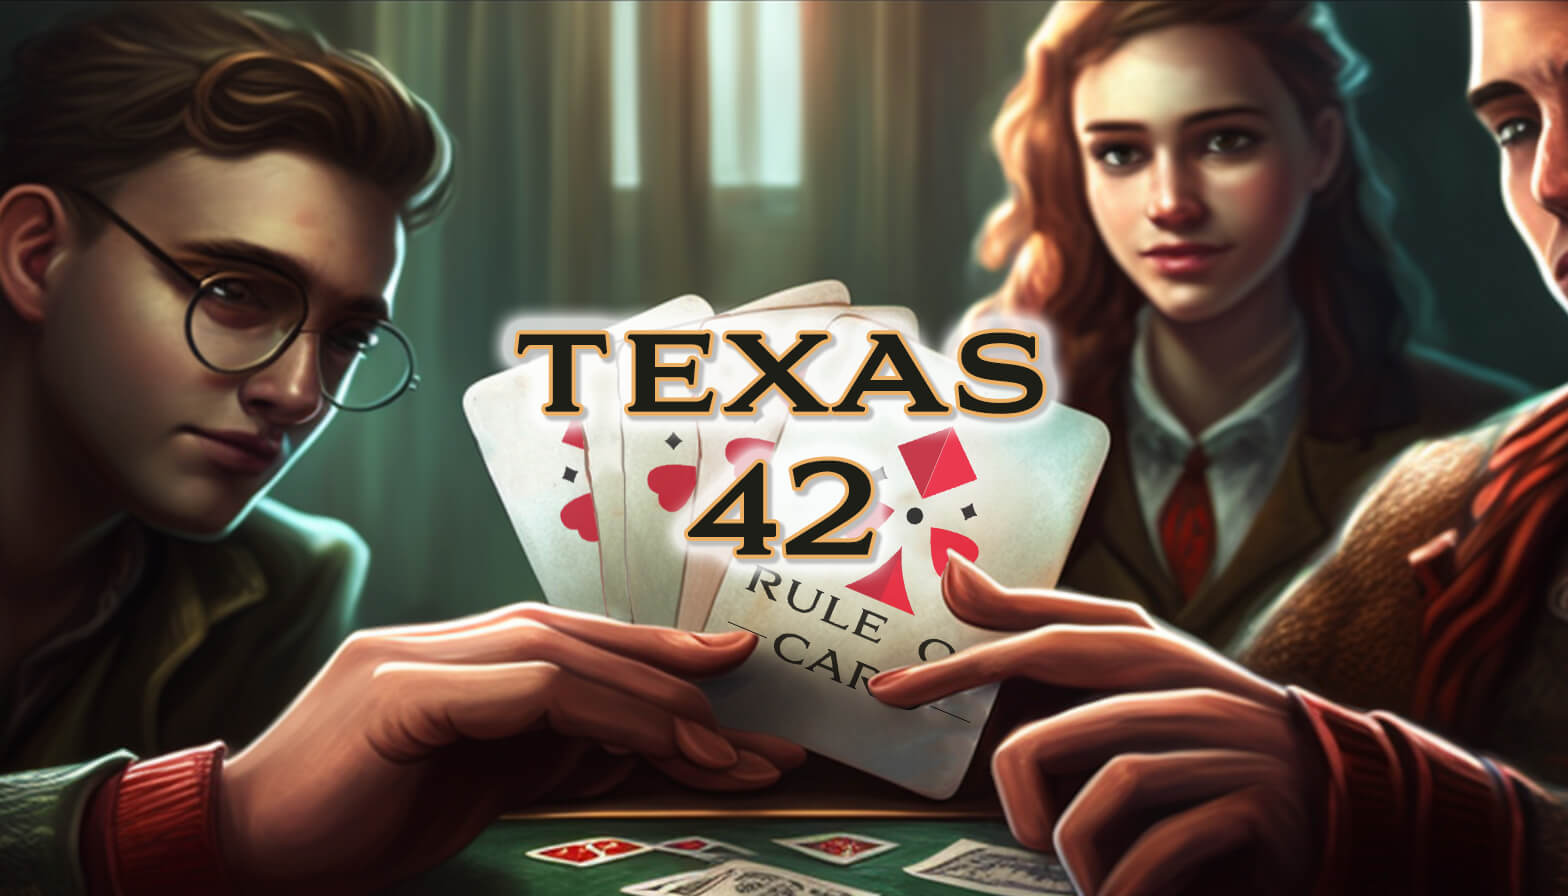 Playing the card game Texas 42